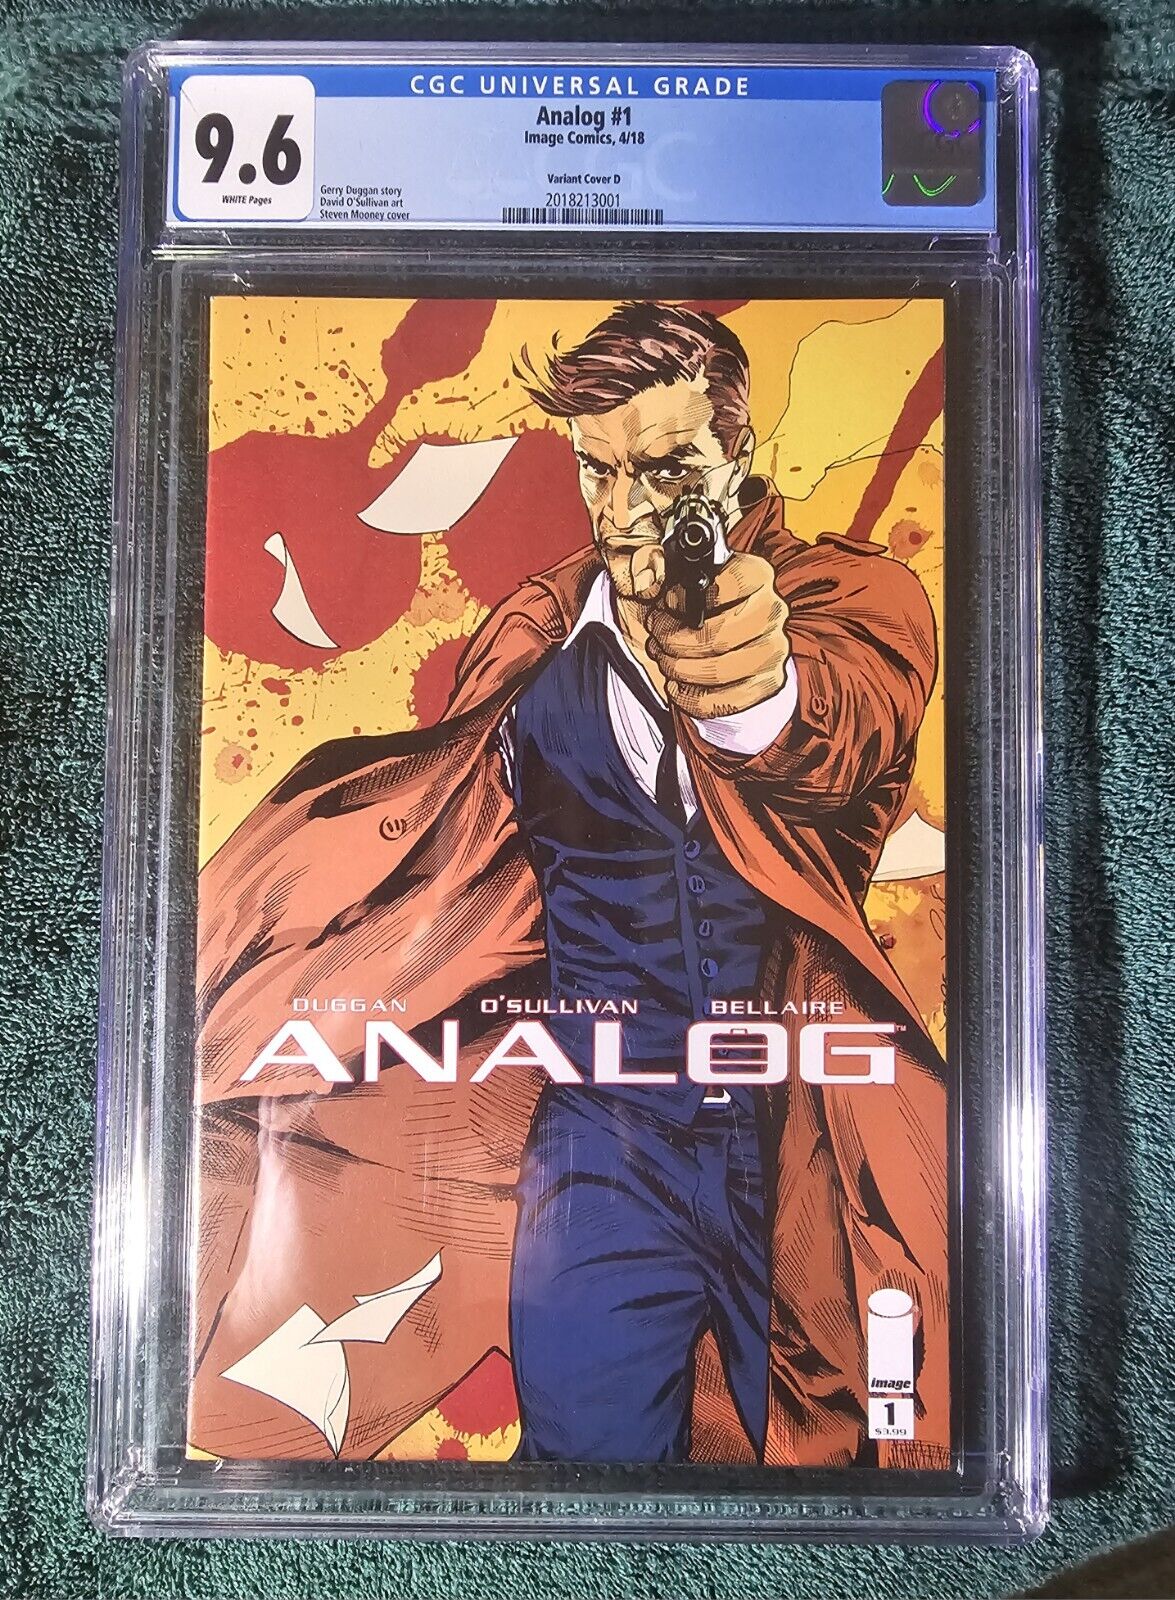 Analog  #1- CGC 9.6 - Variant Cover D 